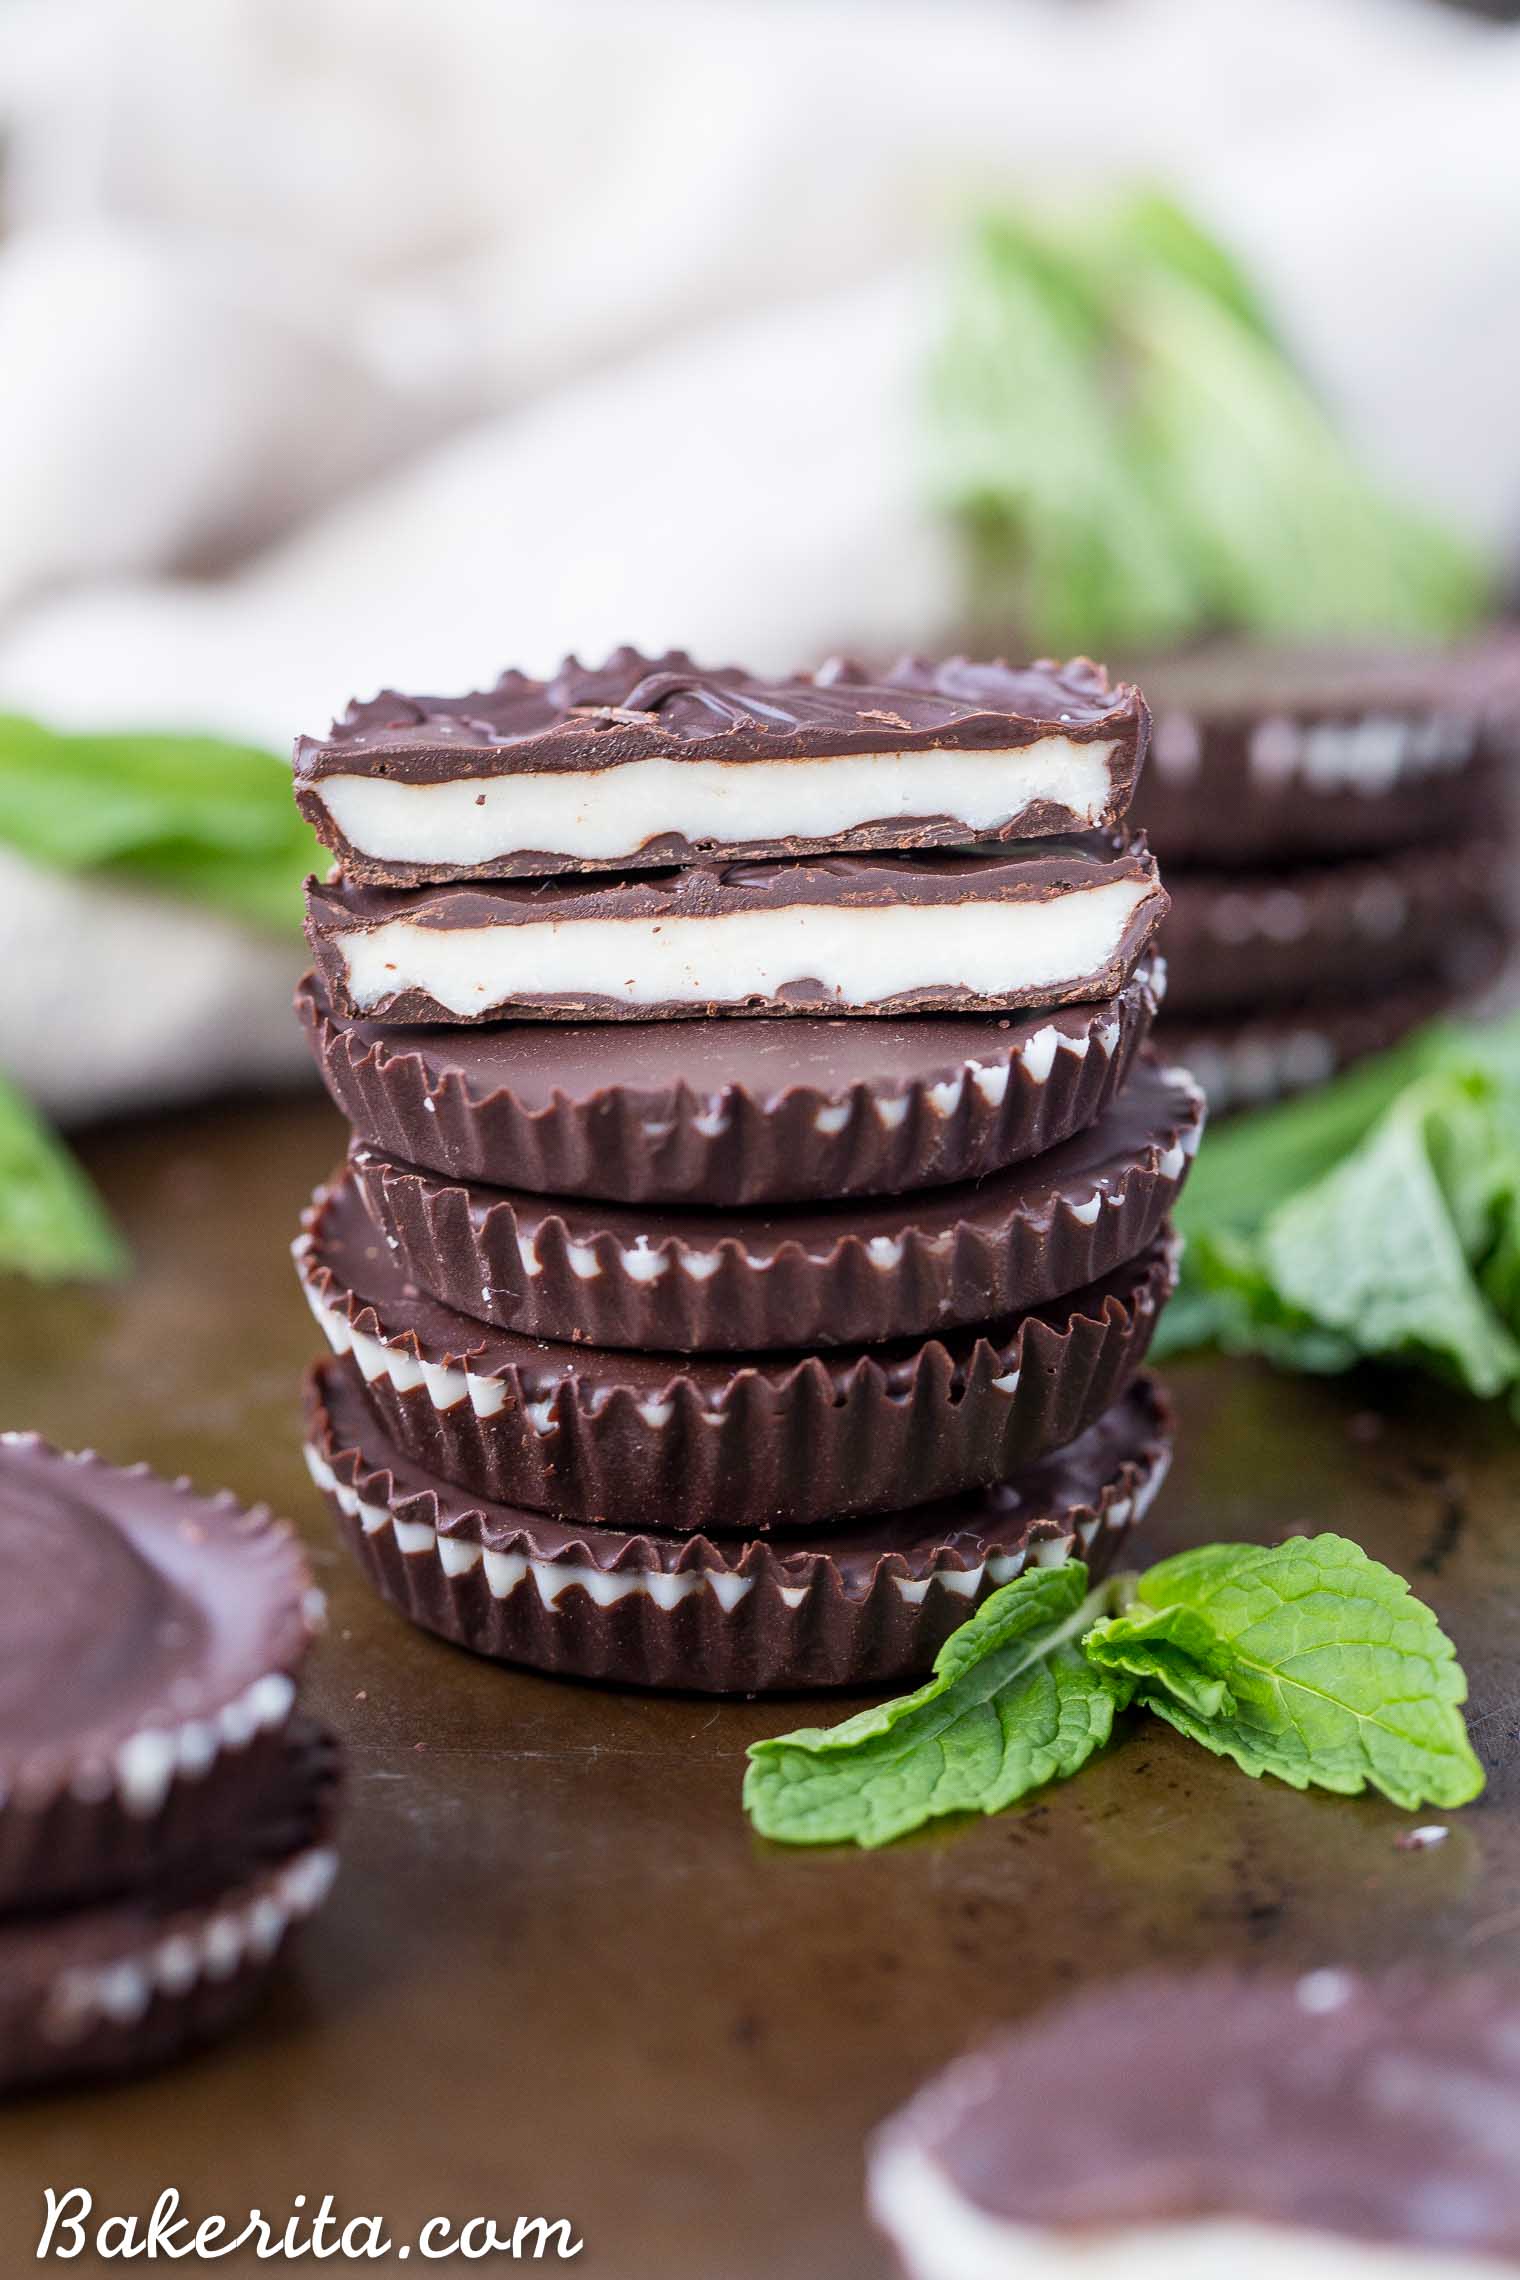 These Chocolate Peppermint Cups have a coconut butter peppermint filling, surrounded by homemade dark chocolate. You'll love these easy to make, gluten-free, paleo, and vegan homemade peppermint patties.